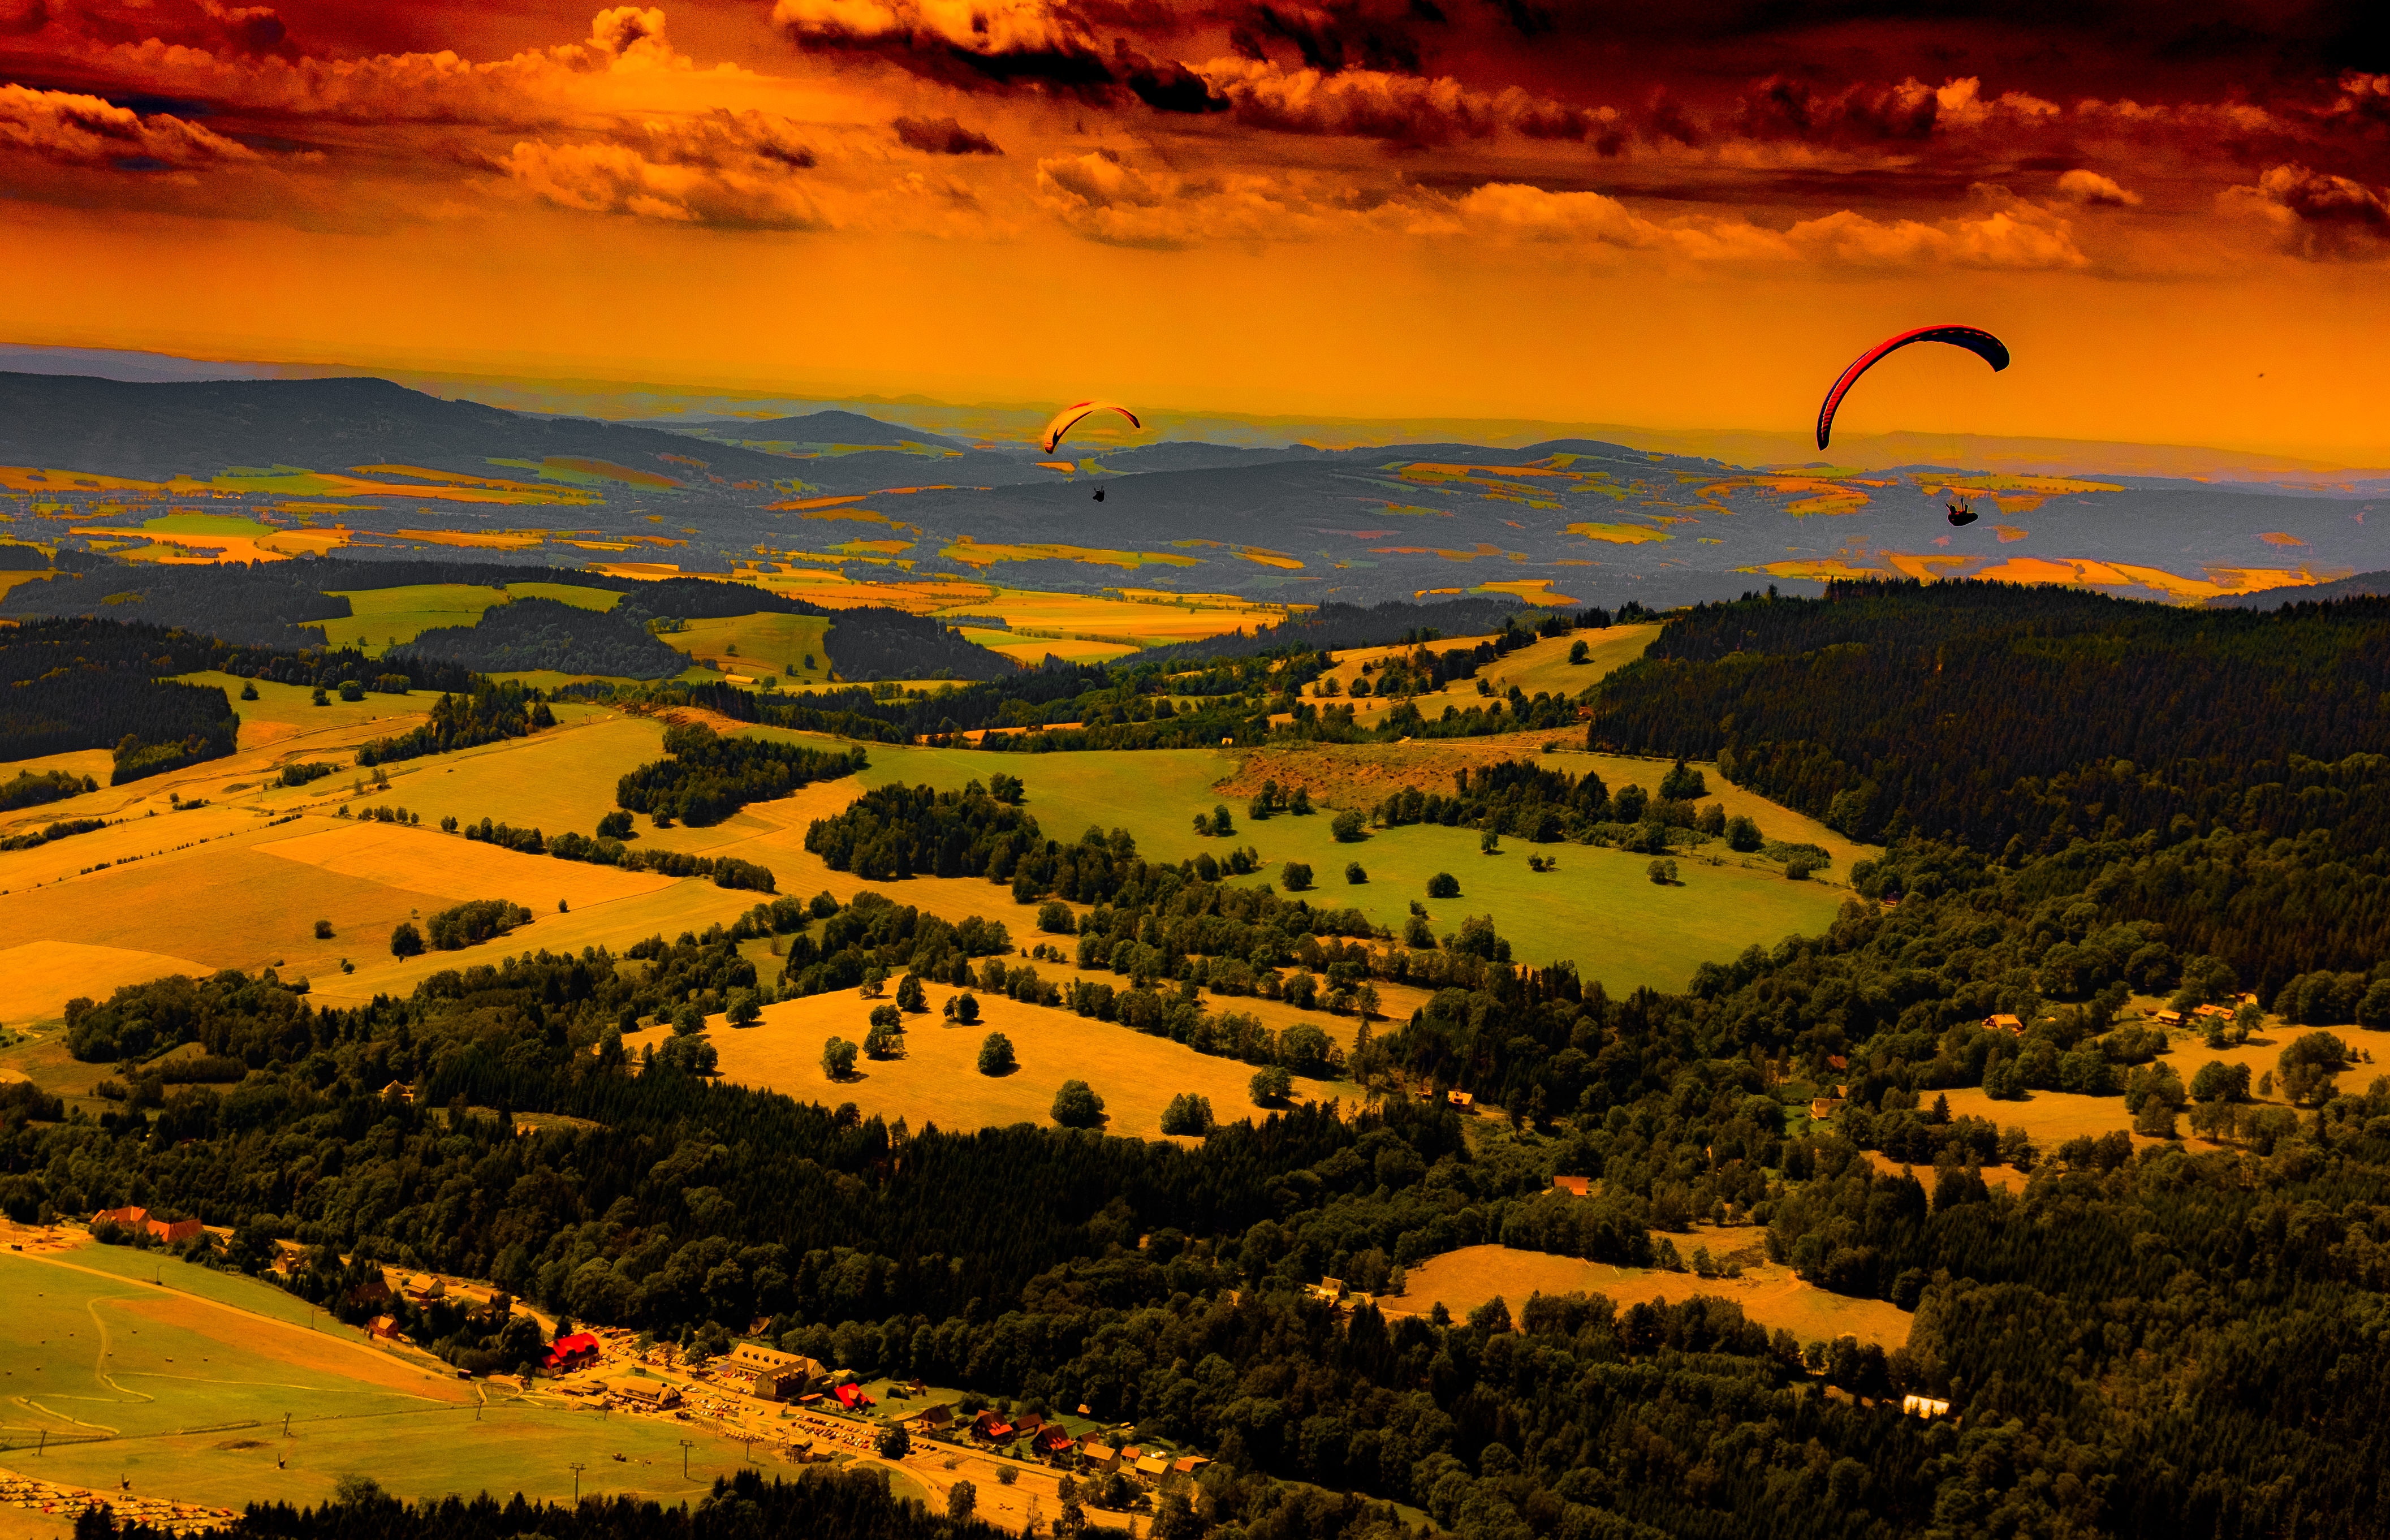 two paragliding in the air in sunset